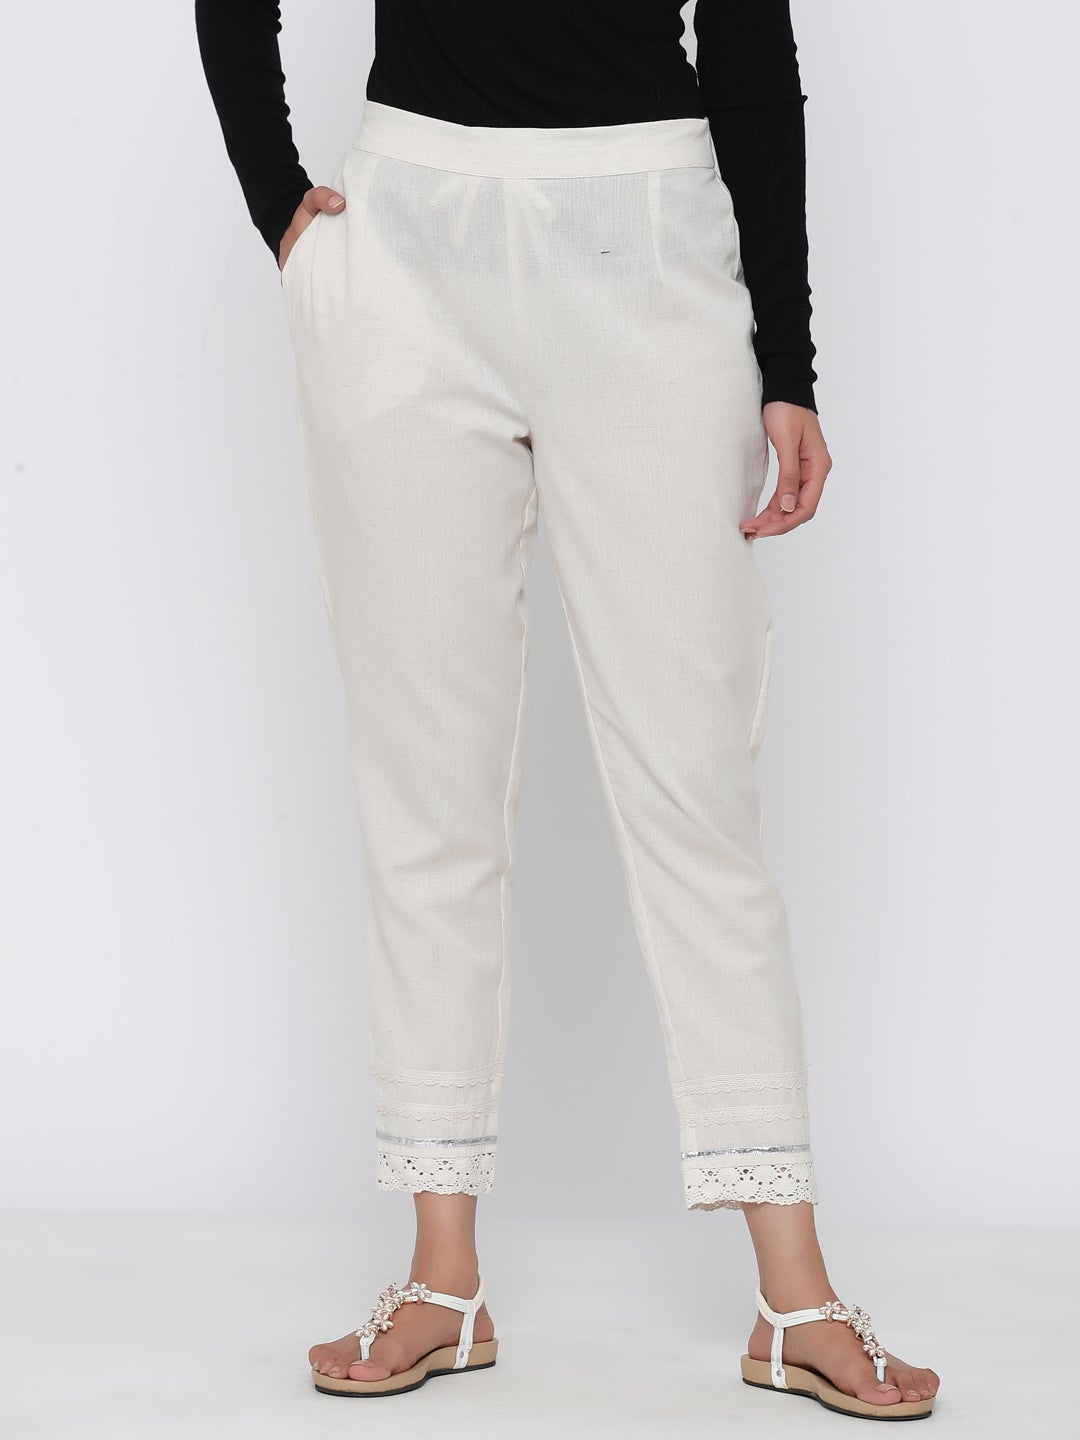 Juniper Off-White Solid Cotton Flex Slim Fit Women Pants With One Pocket